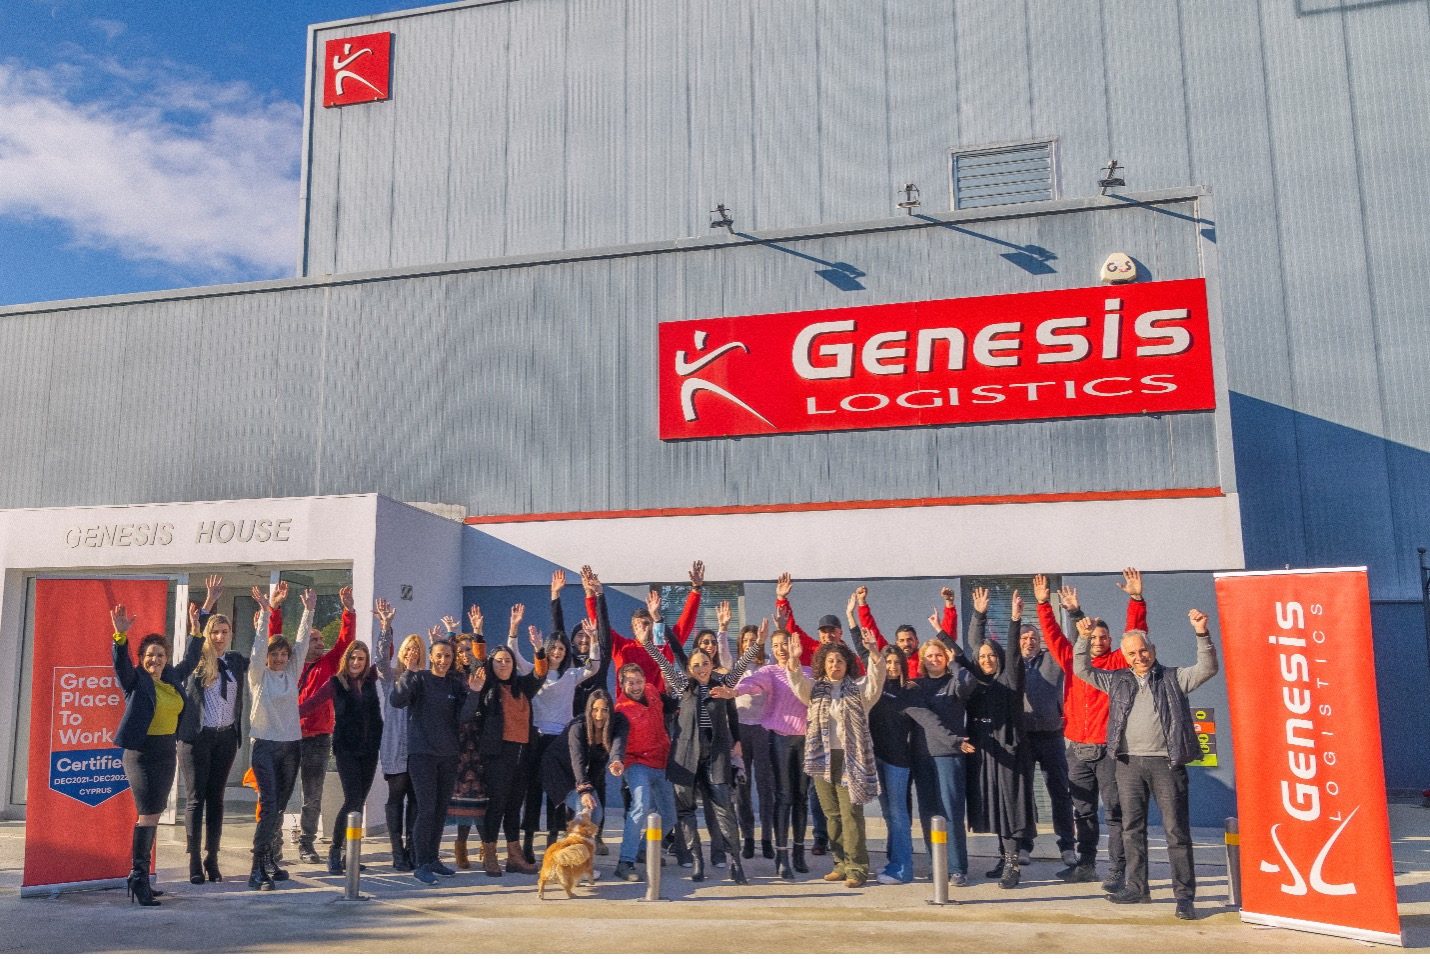 Genesis Logistics Cyprus has been certified a Great Place to Work